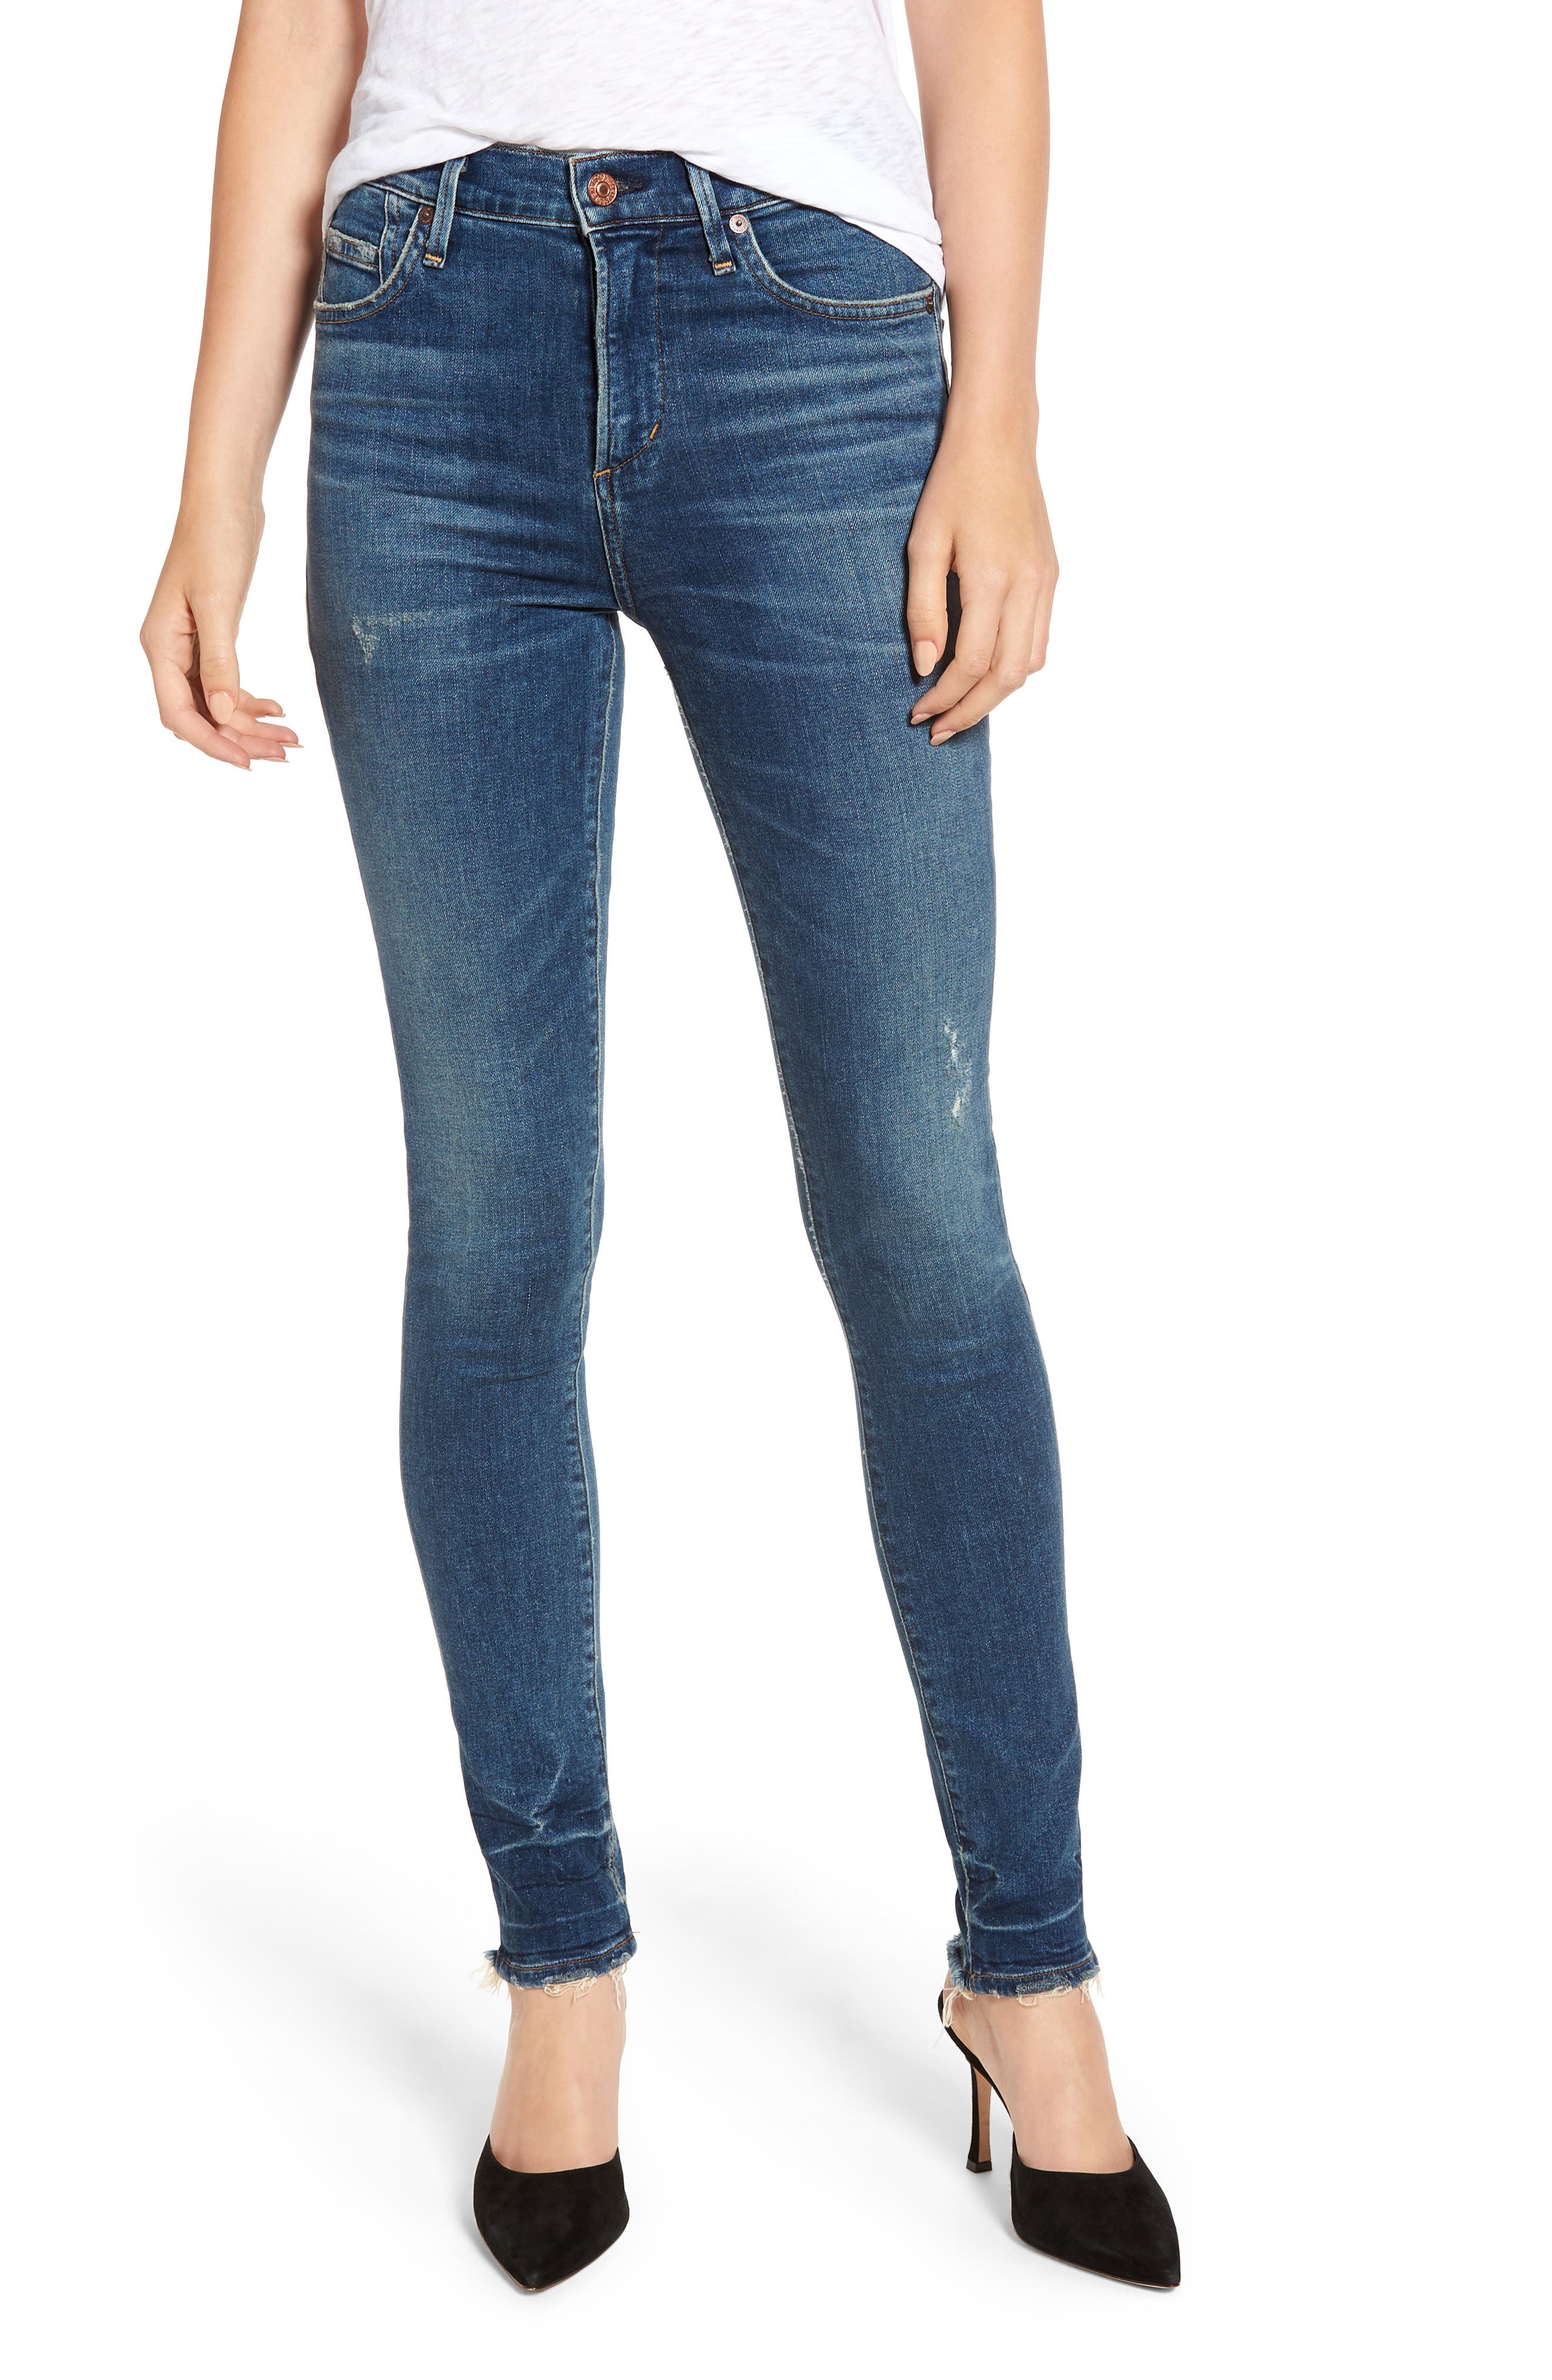 citizens of humanity rocket high rise jeans